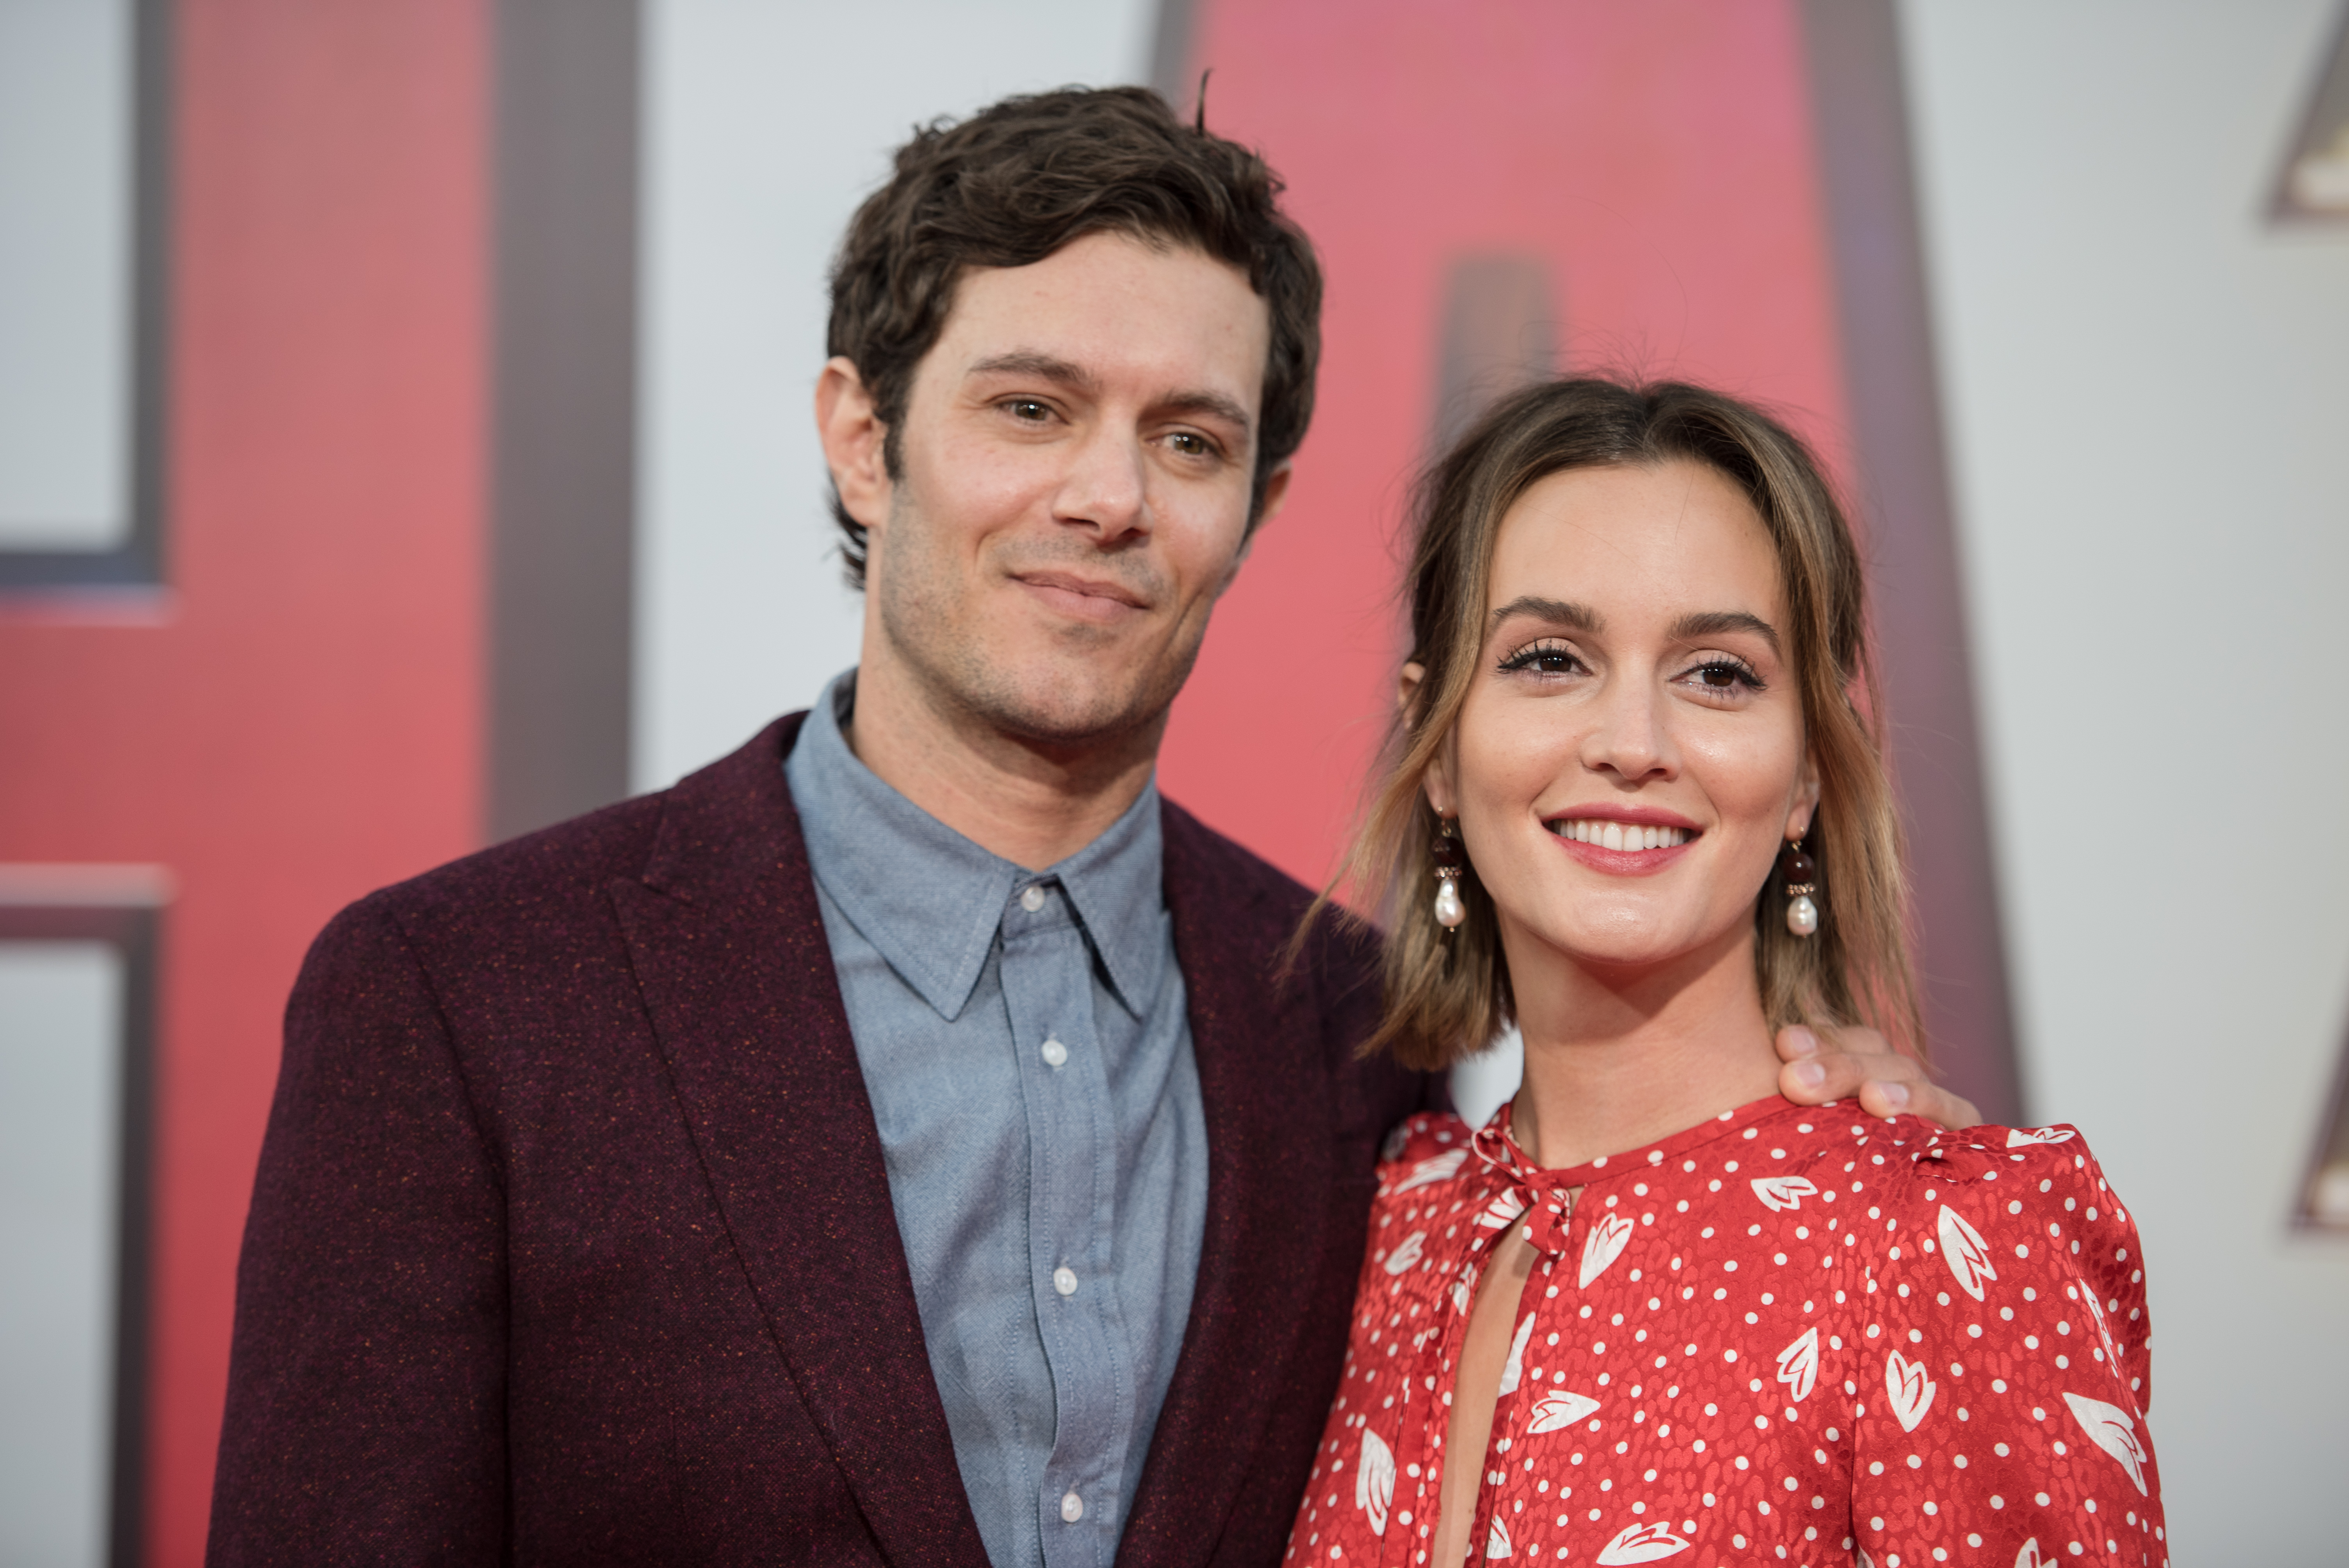 Adam Brody and Leighton Meester arrive at Warner Bros. Pictures and New Line Cinema's world premiere of "Shazam!" at TCL Chinese Theatre on March 28, 2019, in Hollywood, California. | Source: Getty Images